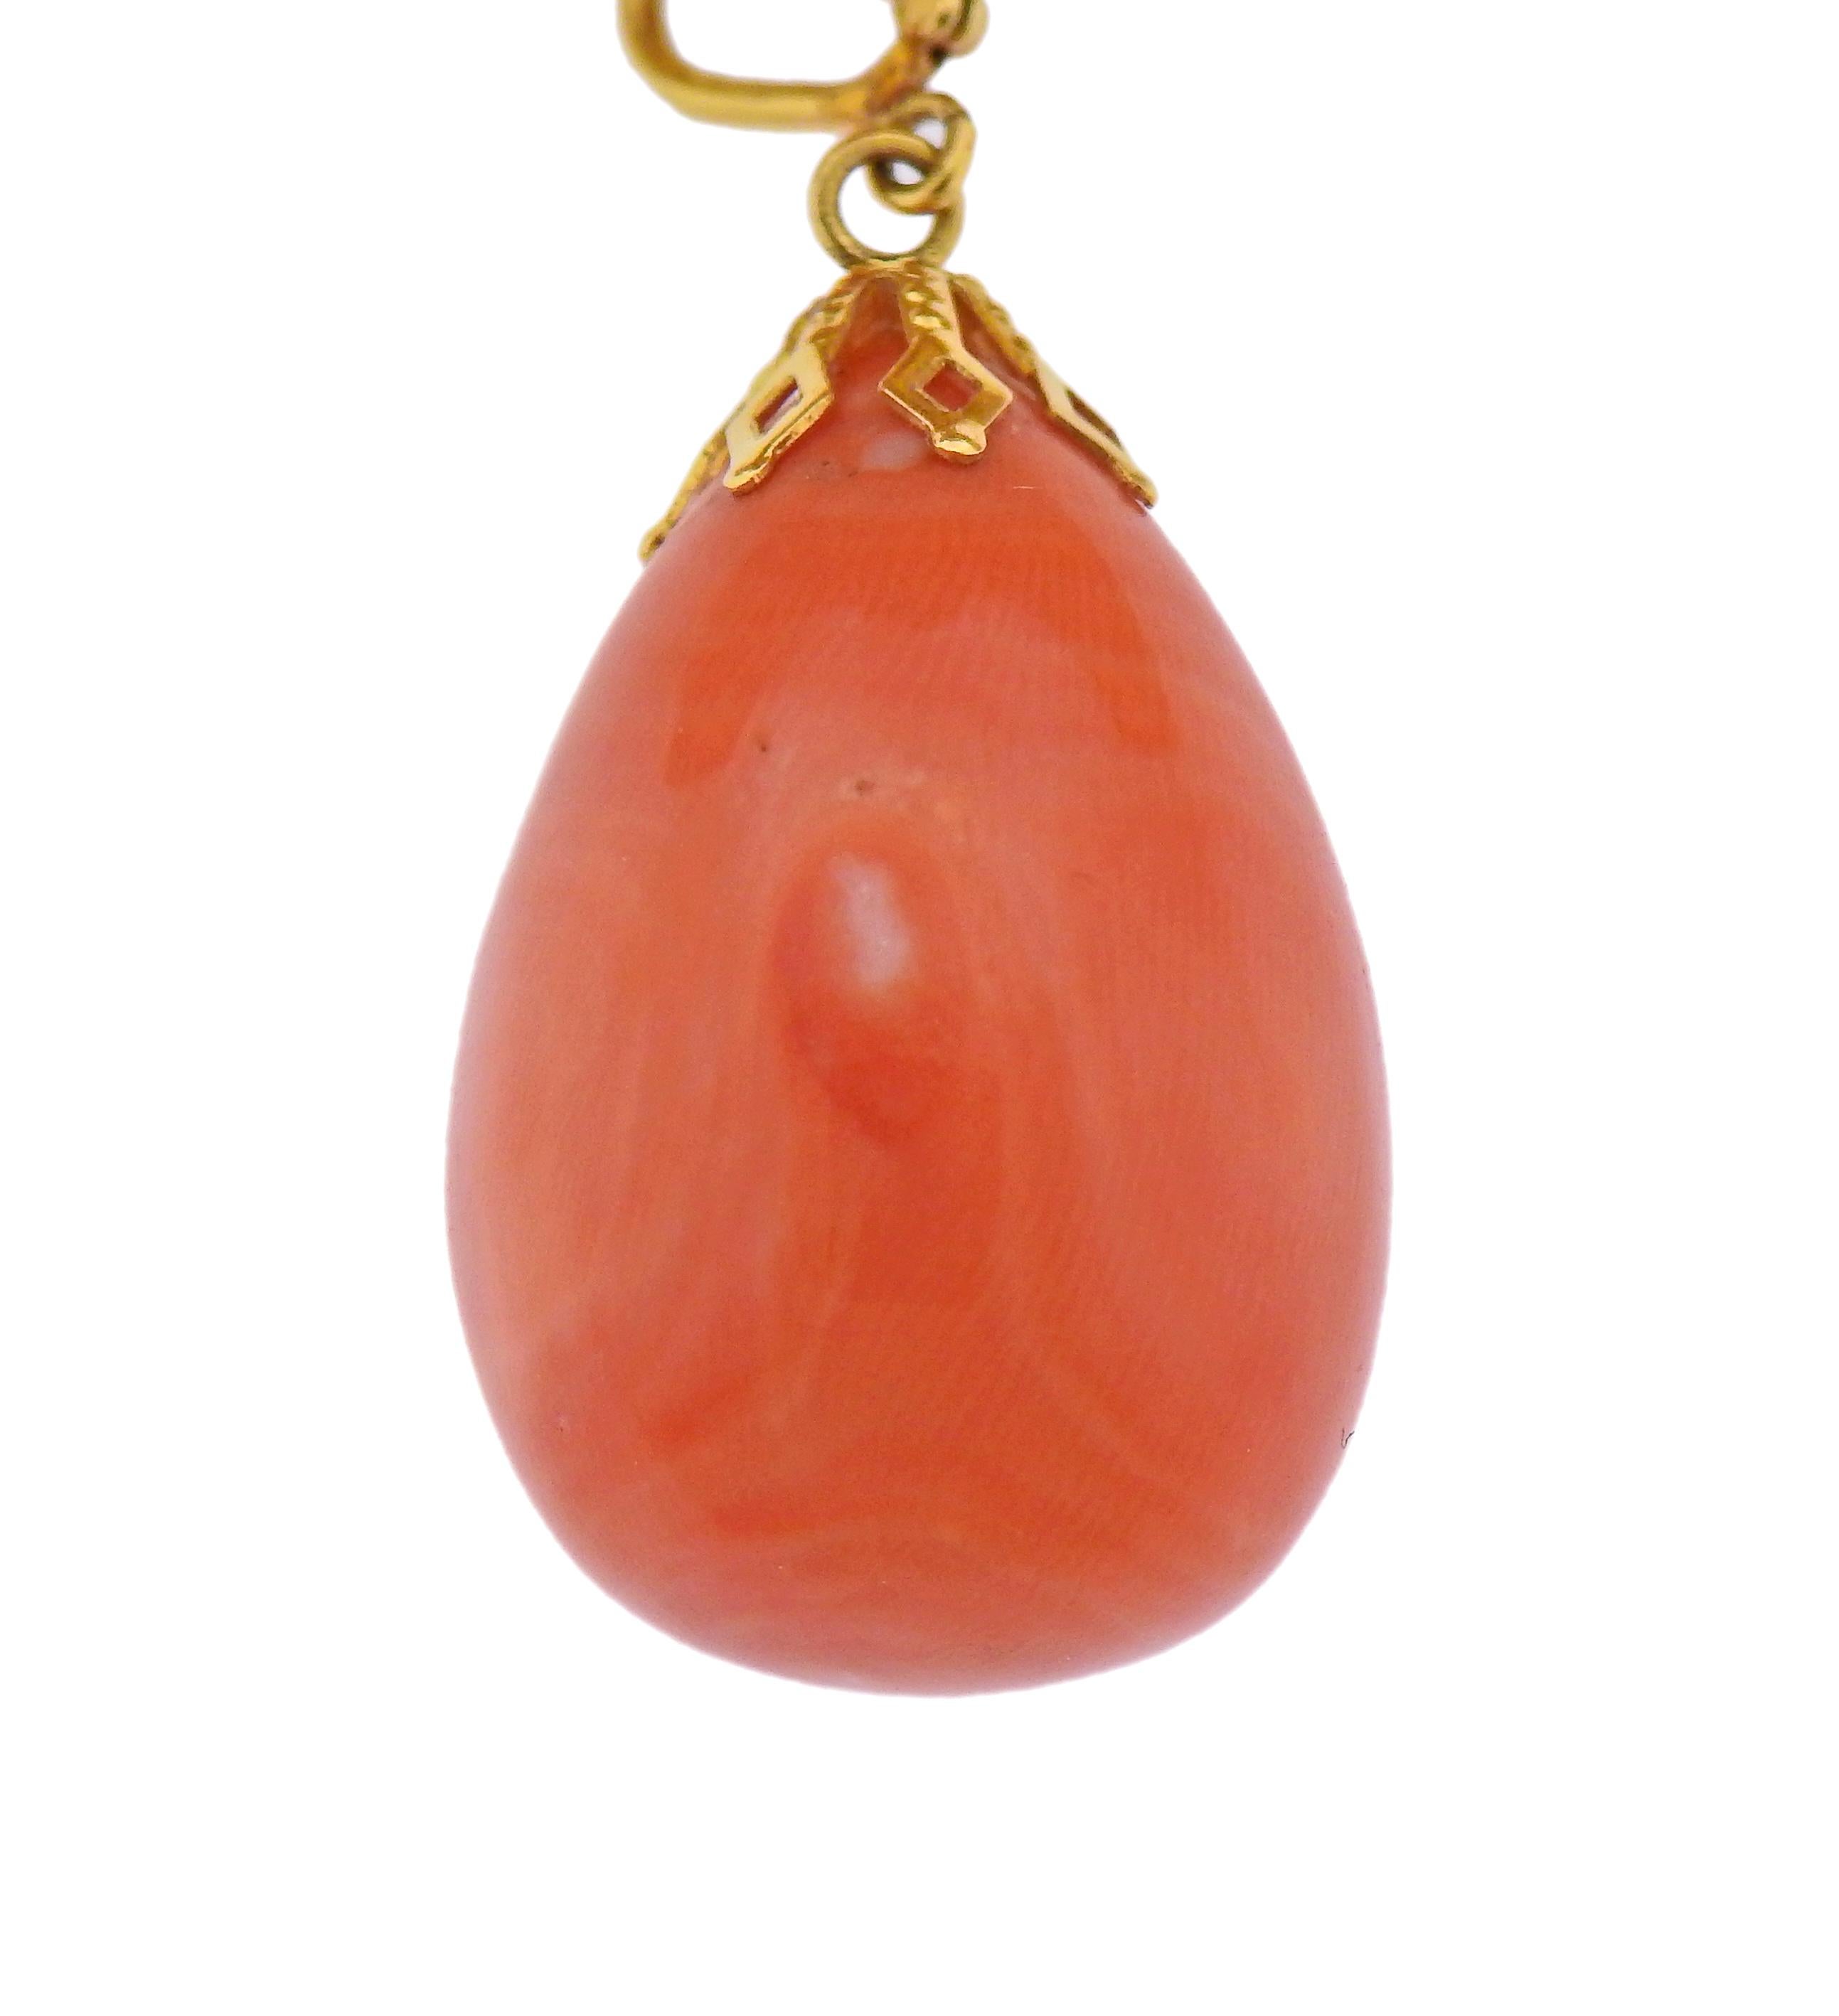 Antique Victorian 14k gold brooch, featuring teardrop coral (approx. 25 x 18.3mm) Brooch measures 72mm x 74mm. Tested 14k. Weight - 32.9 grams.